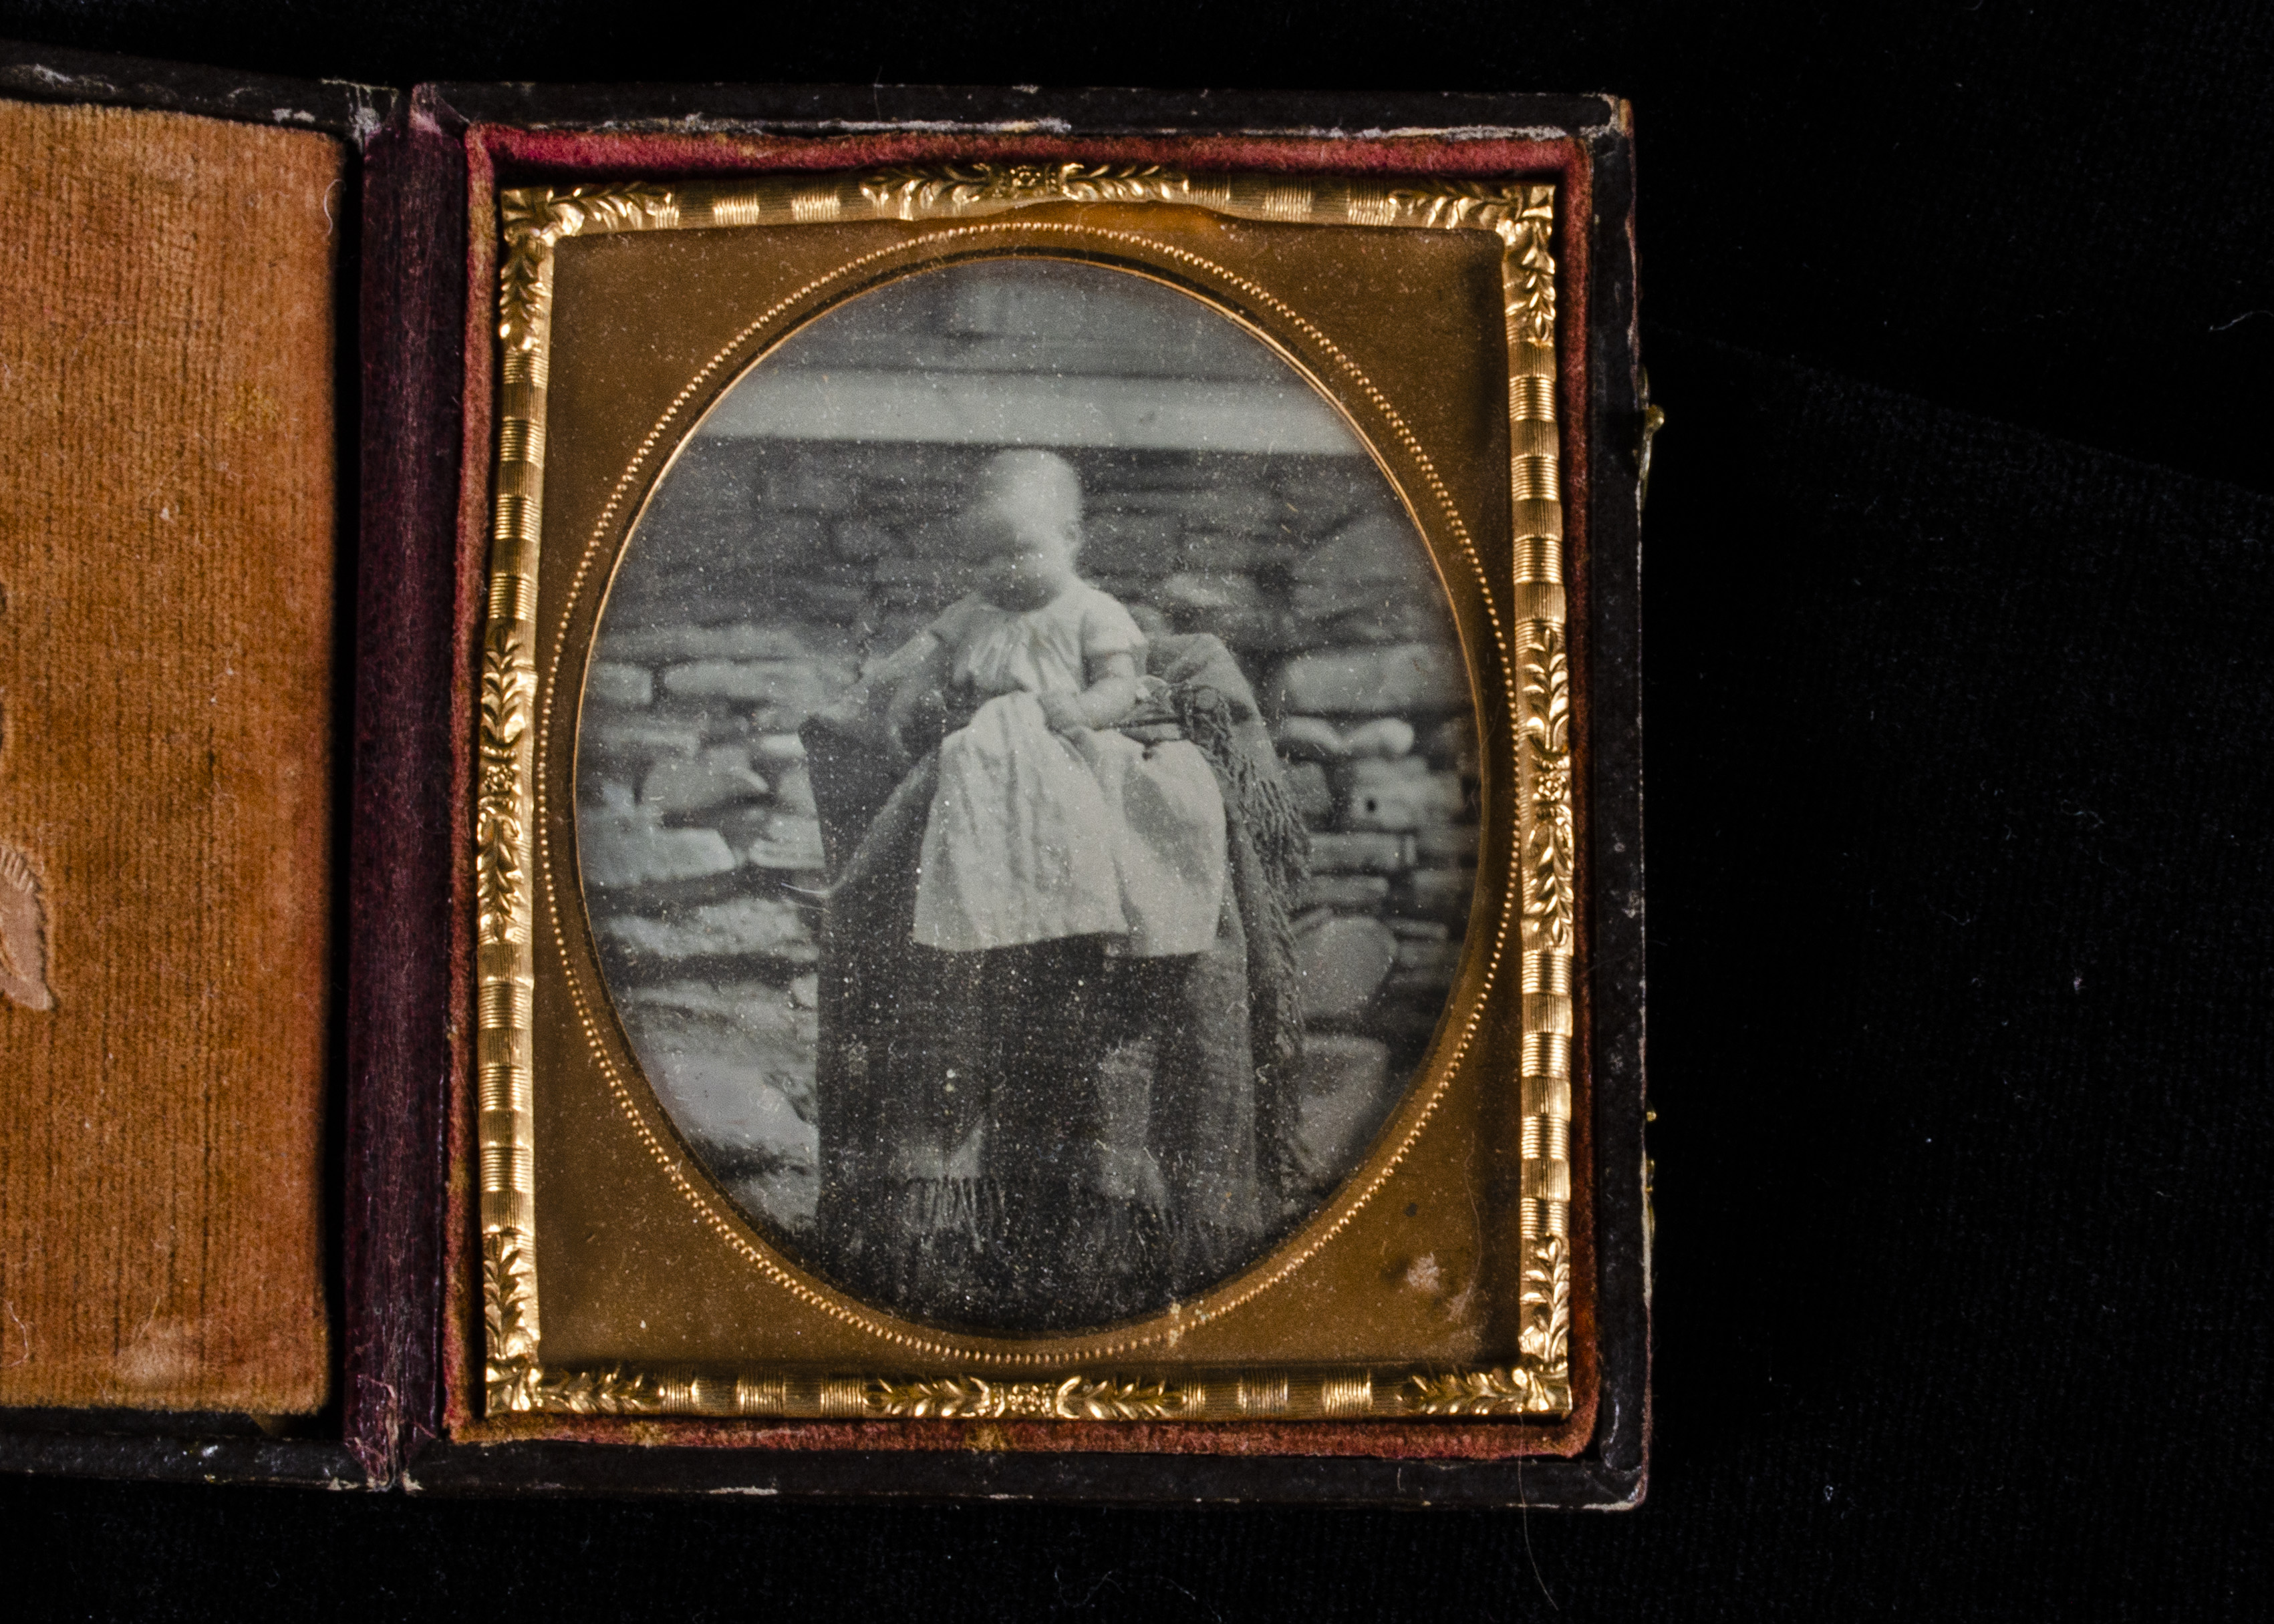 A mid-19th Century cased Sixth-Plate Daguerreotype of a Baby, cradled outside in chair covered